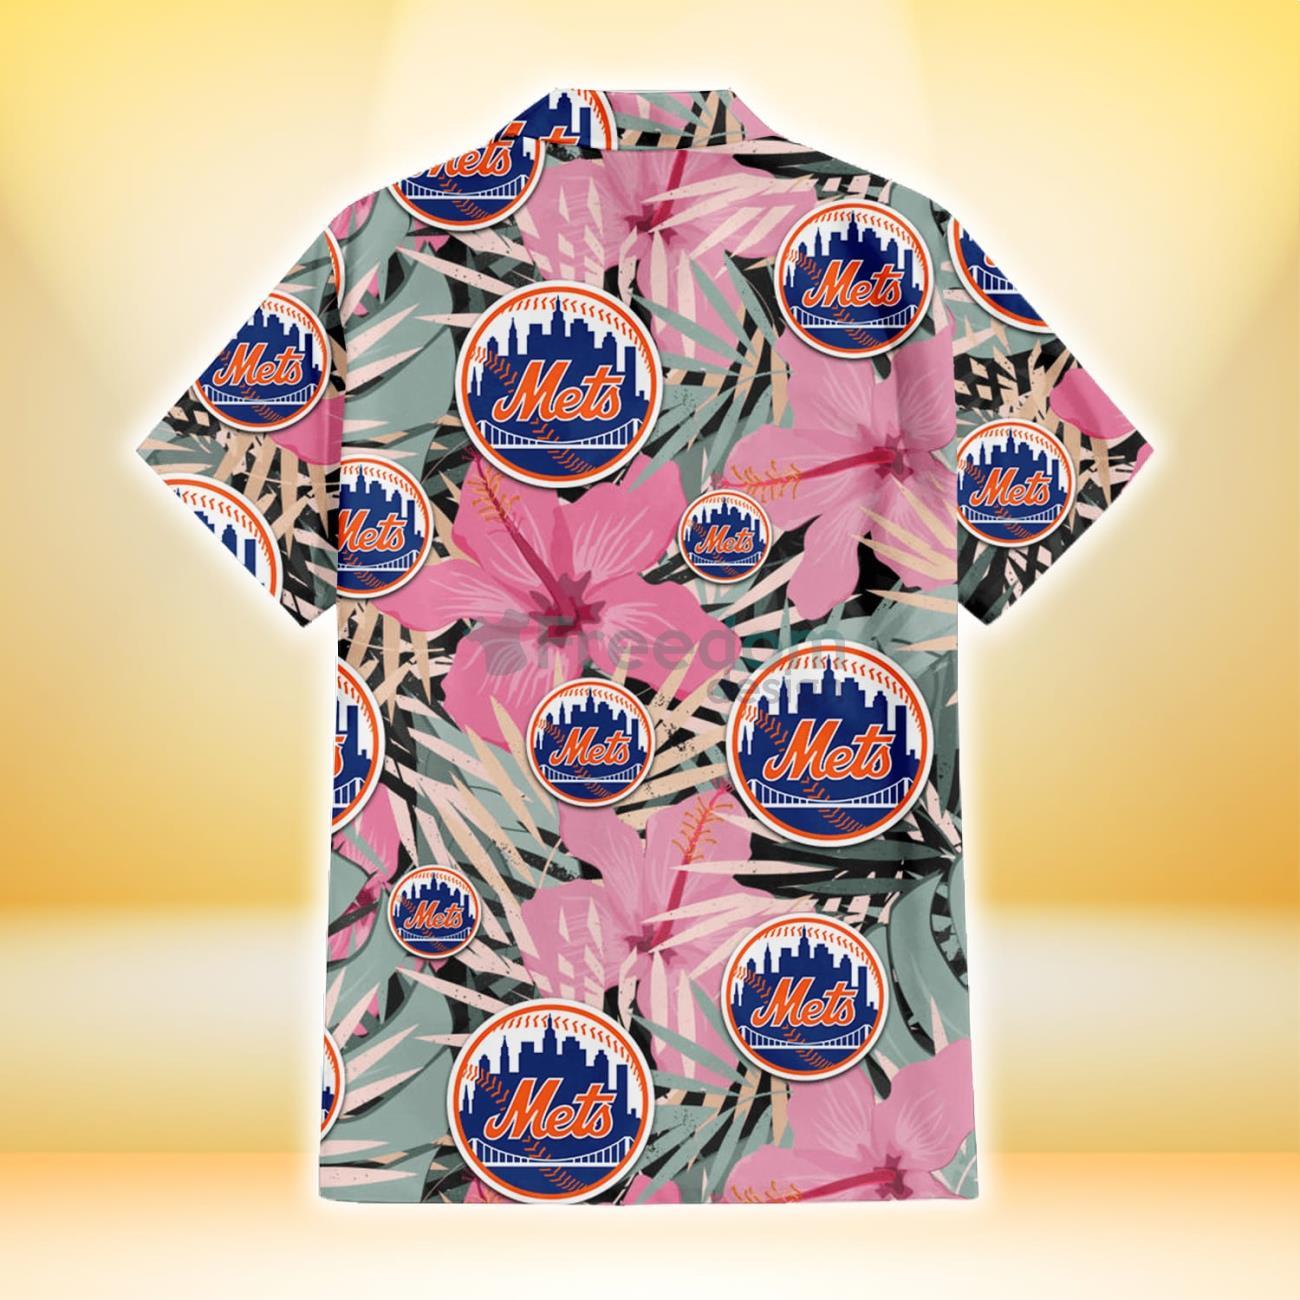 New York Mets Light Pink Hibiscus Pale Green Leaf Black Background 3D  Hawaiian Shirt Gift For Fans - Freedomdesign